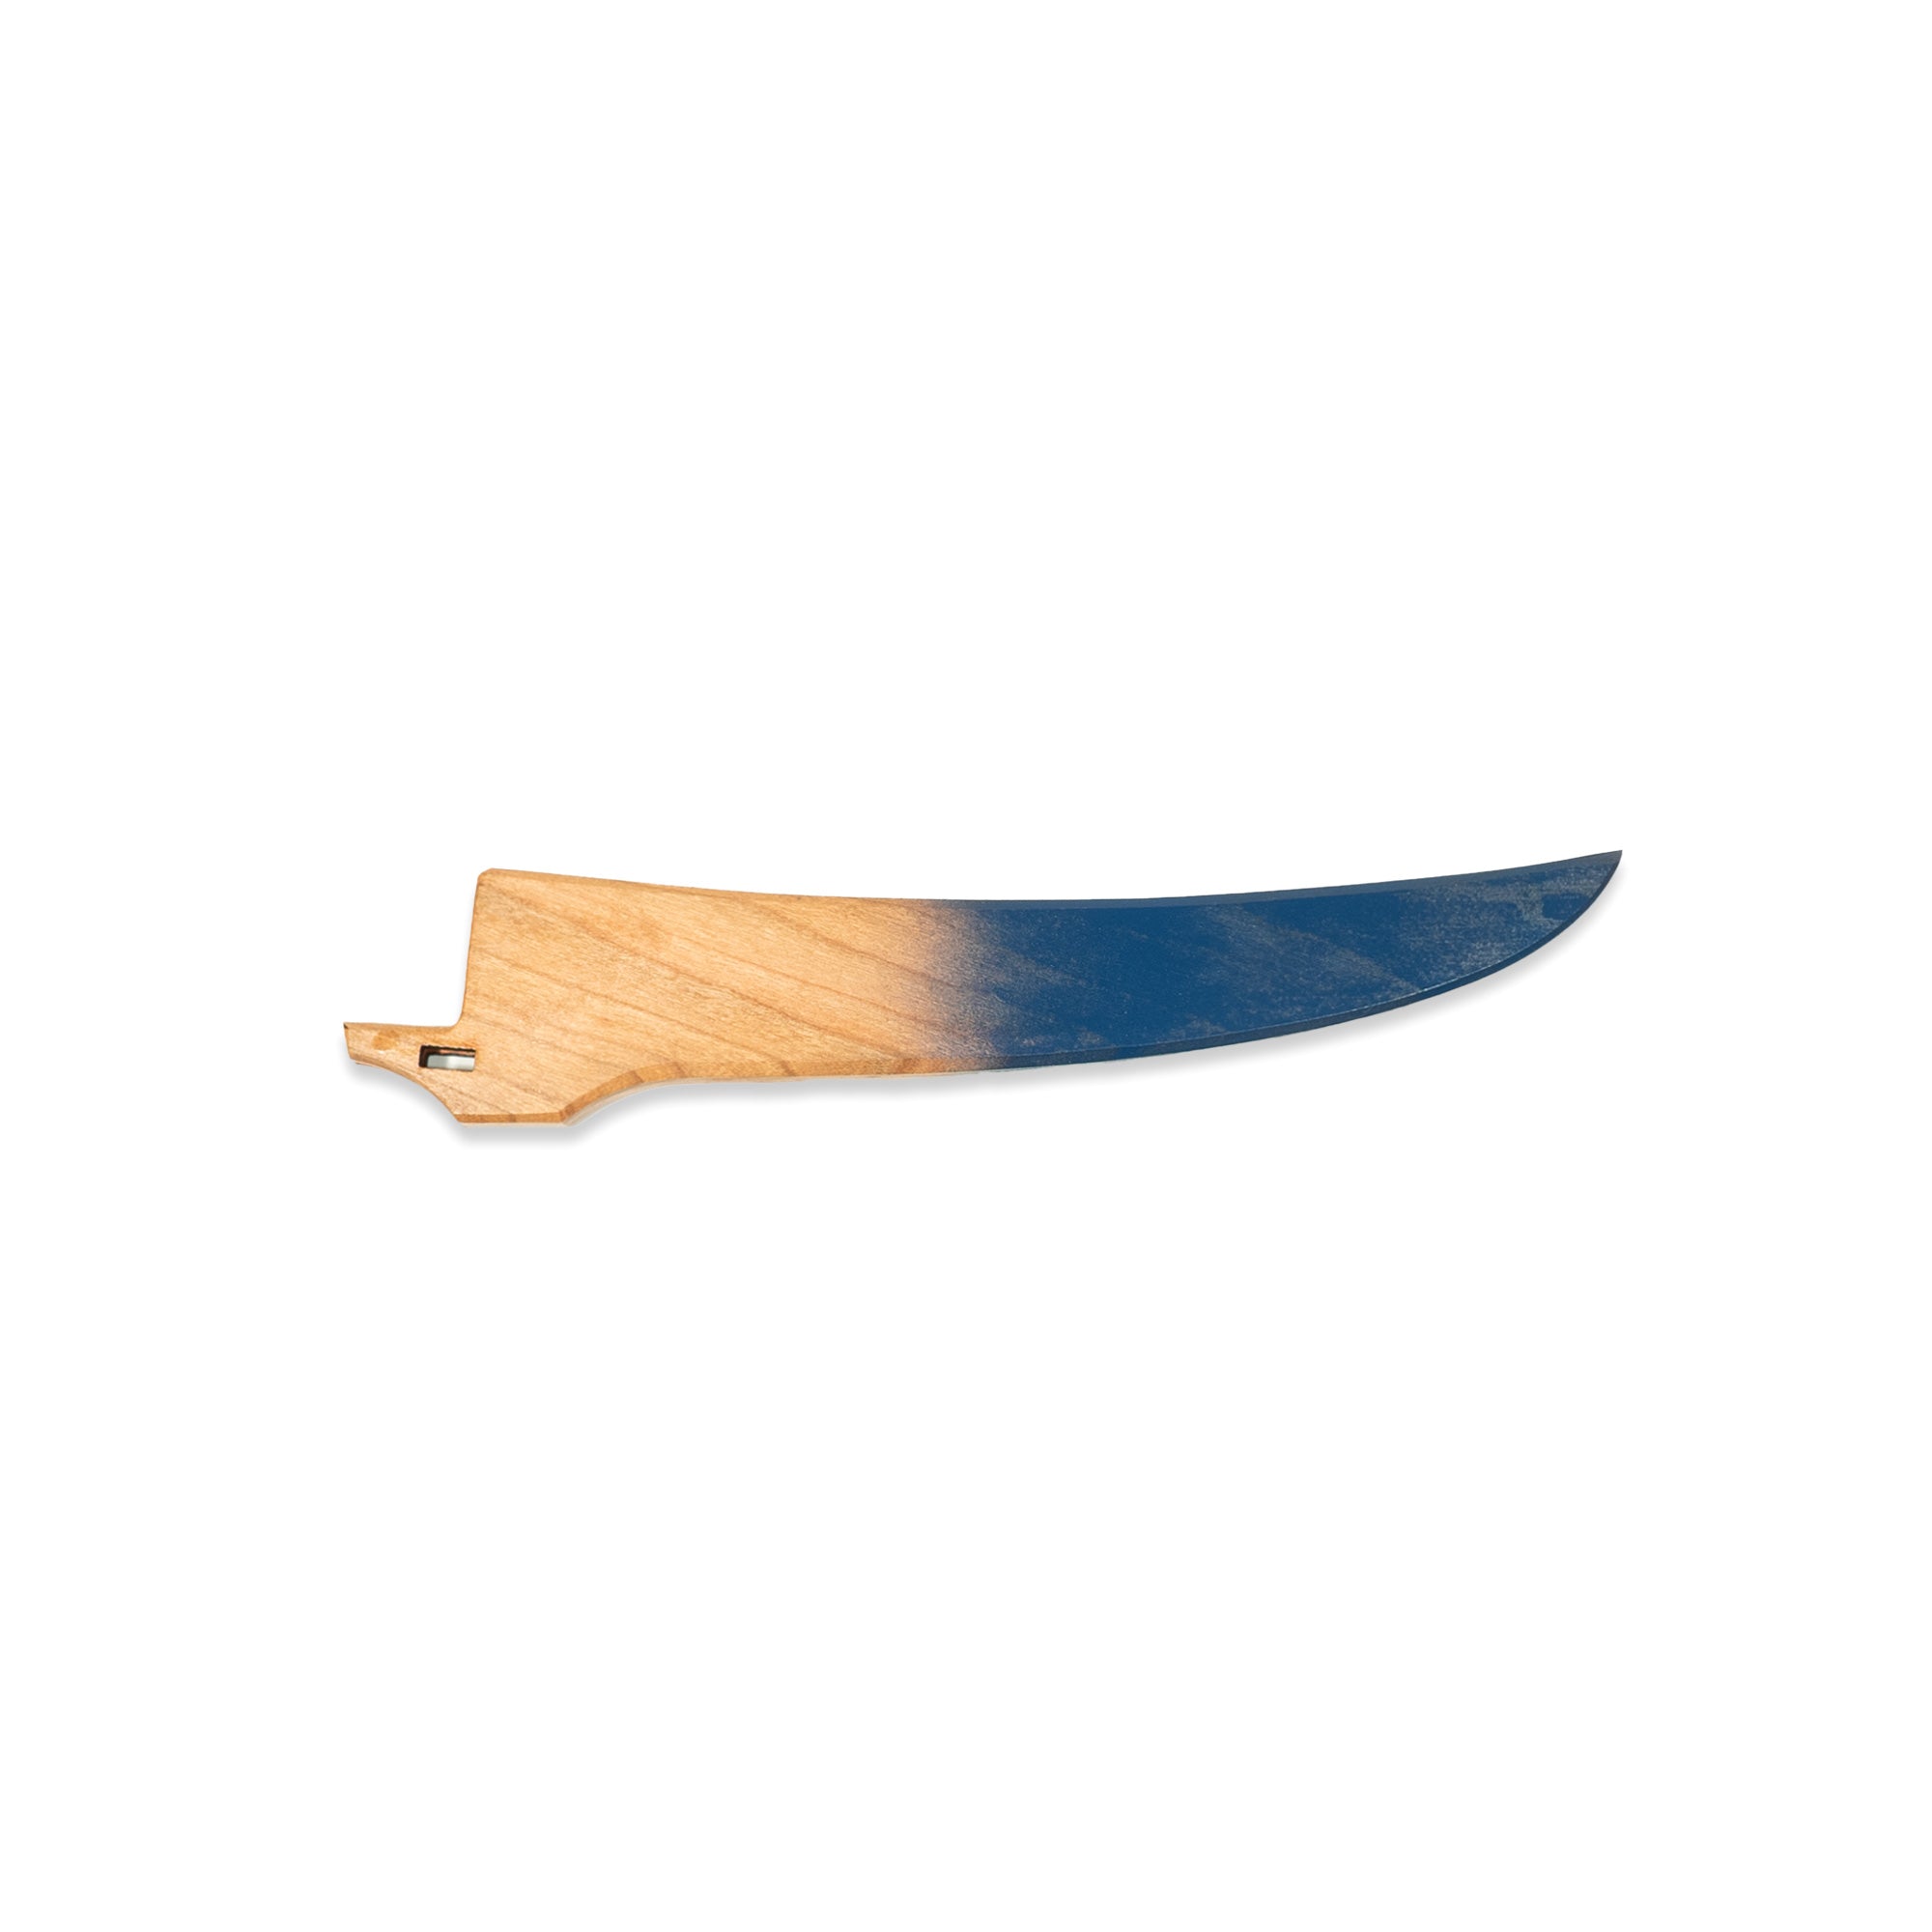 Blue painted and natural cherrywood saya knife cover for Town Cutler Tahoe Bliss Curved Boning Knife